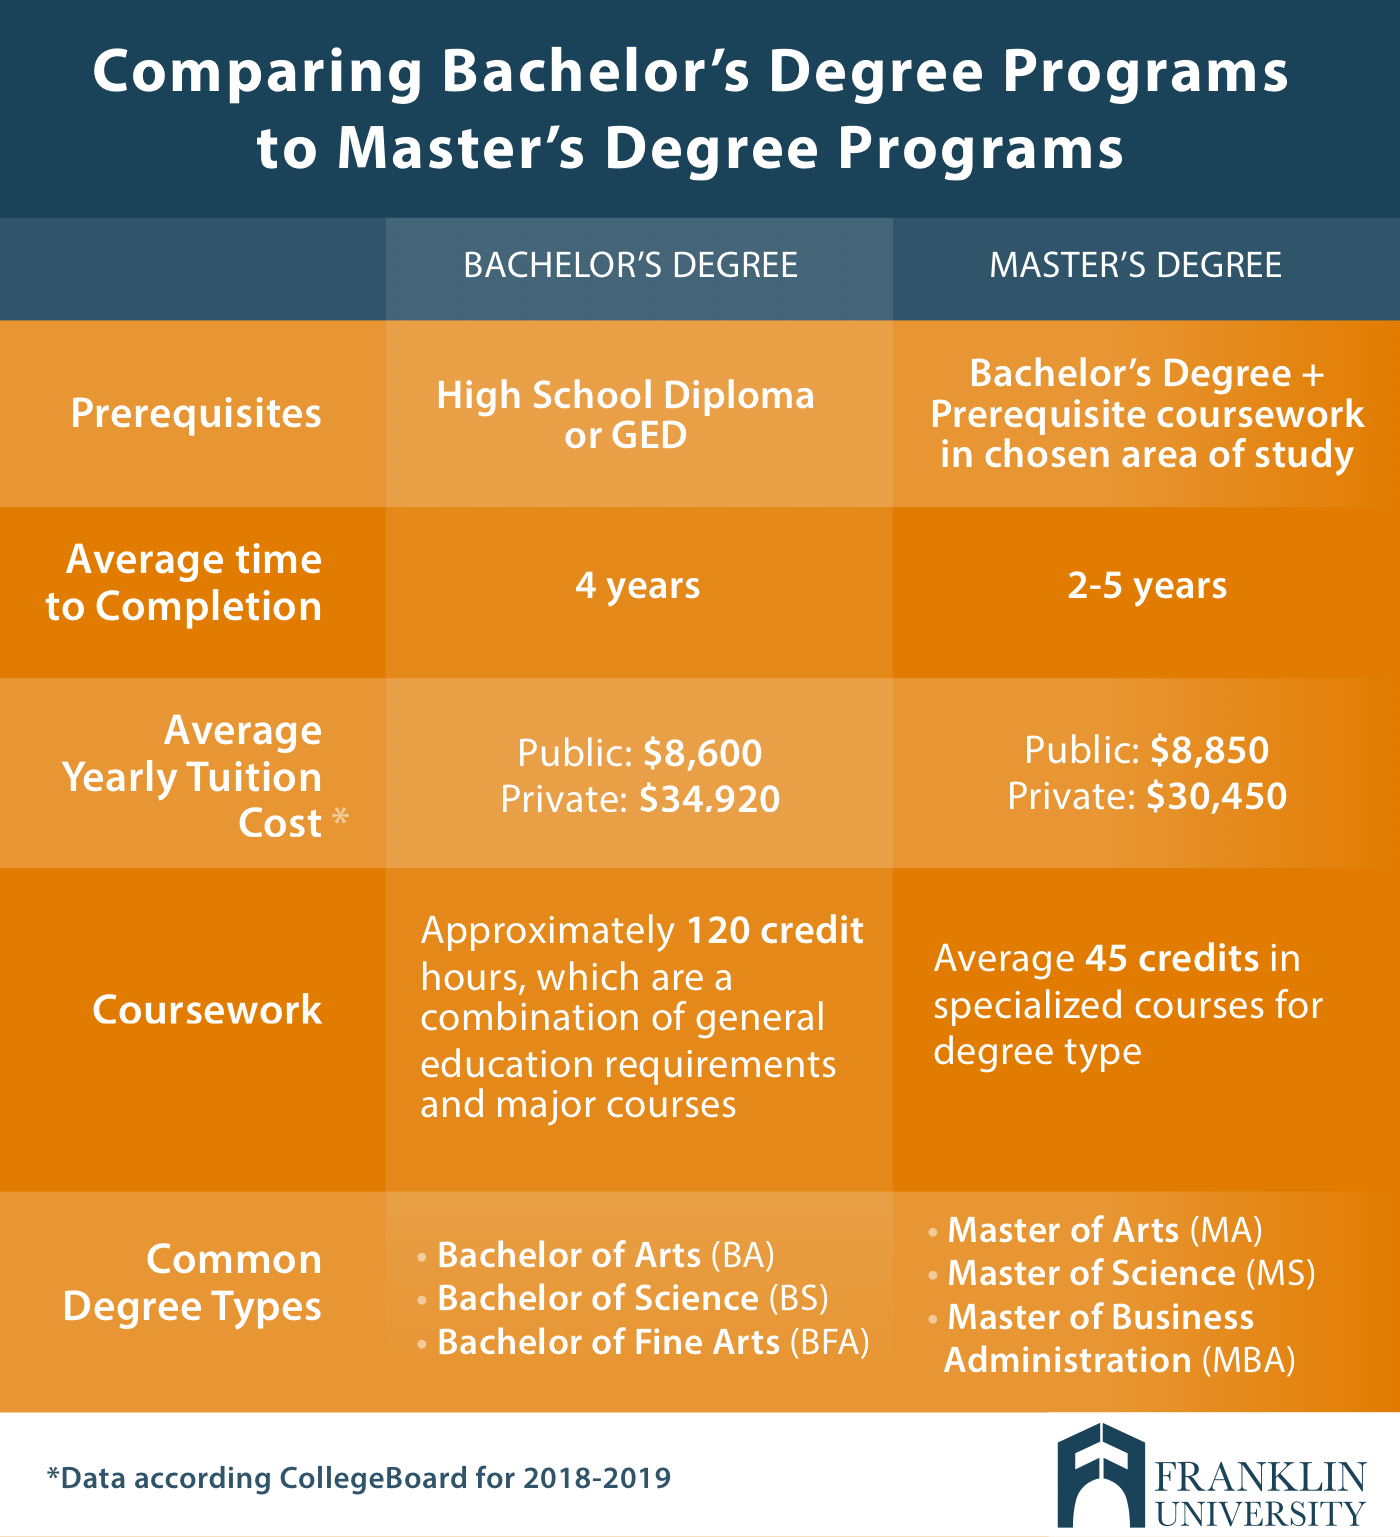 Masters Degree or Master's Degree?